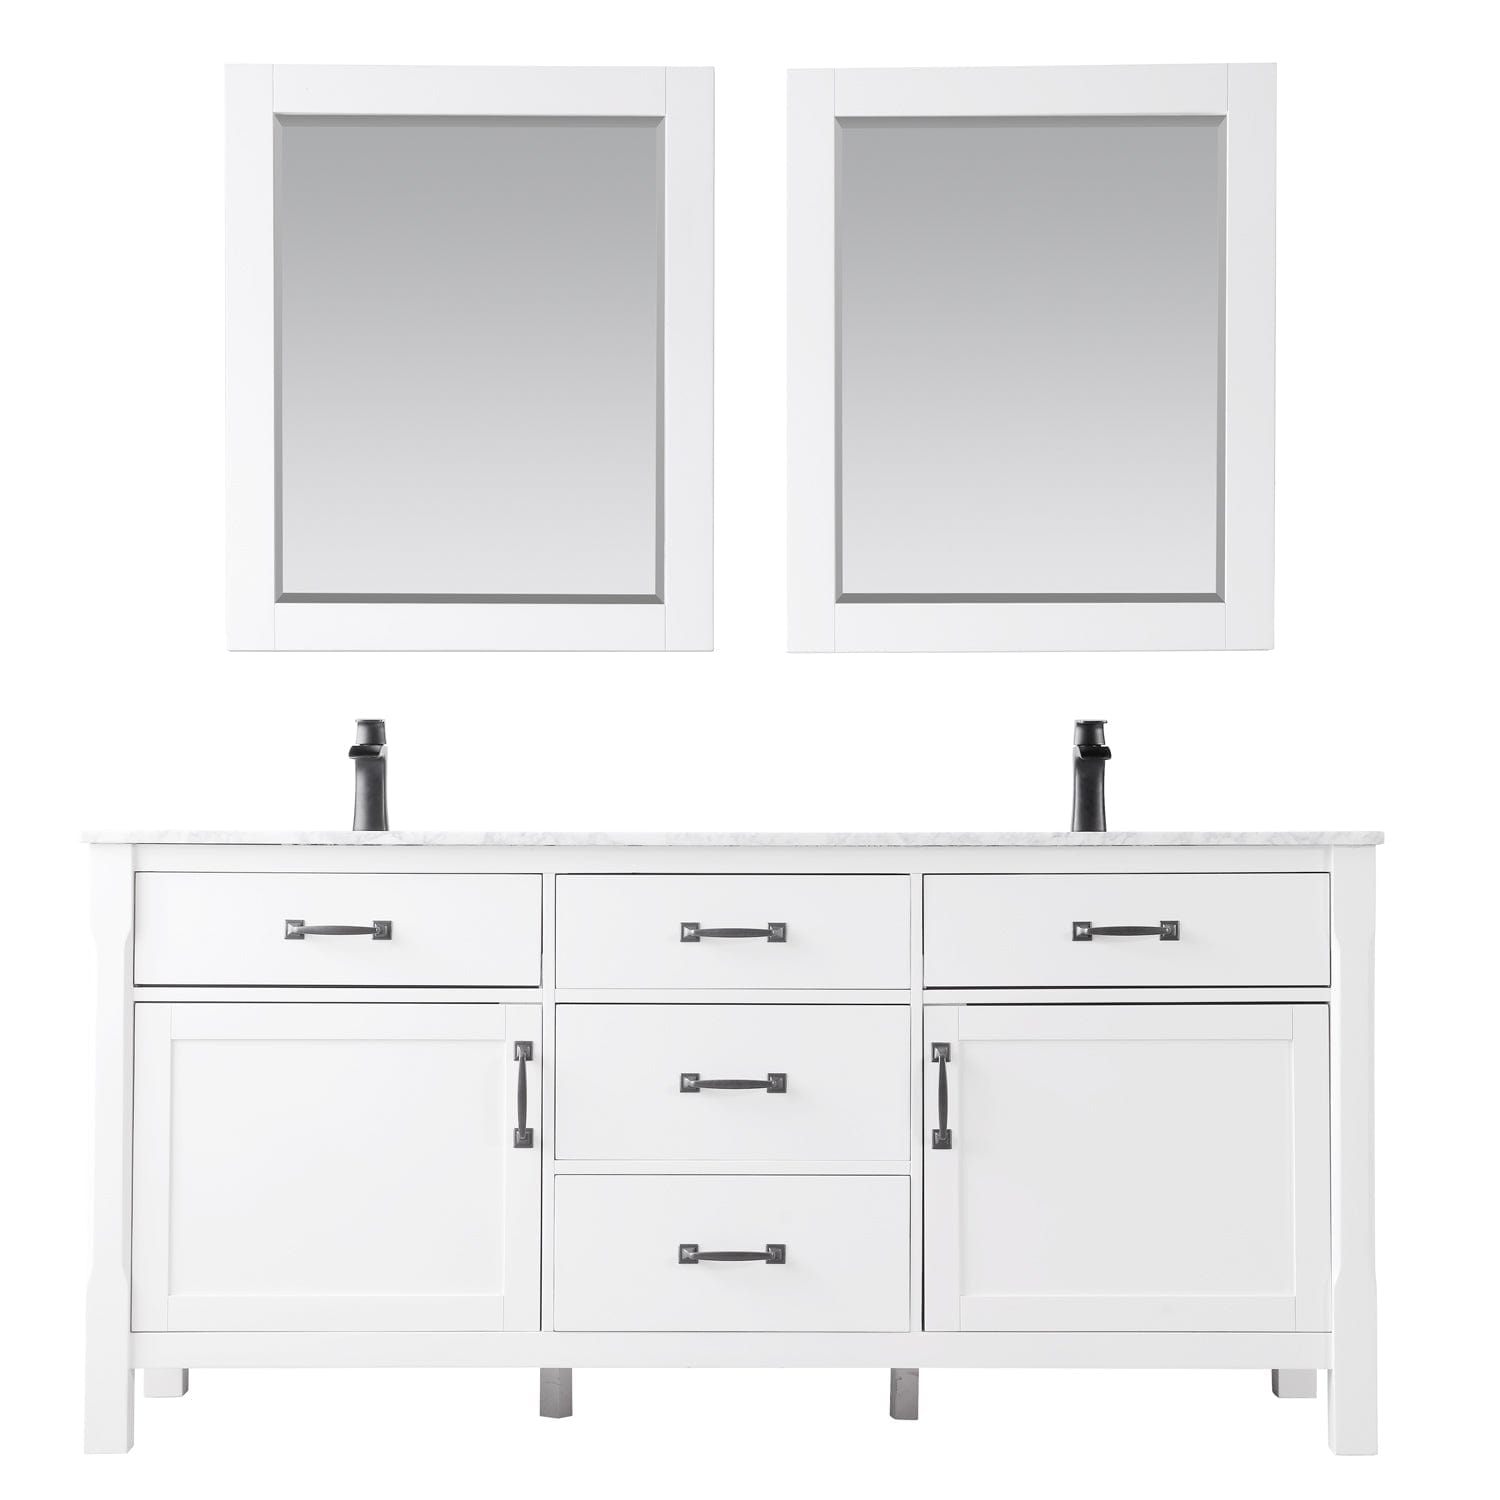 Altair Maribella 72" Double Bathroom Vanity Set in White and Carrara White Marble Countertop with Mirror 535072-WH-CA - Molaix631112970419Vanity535072-WH-CA